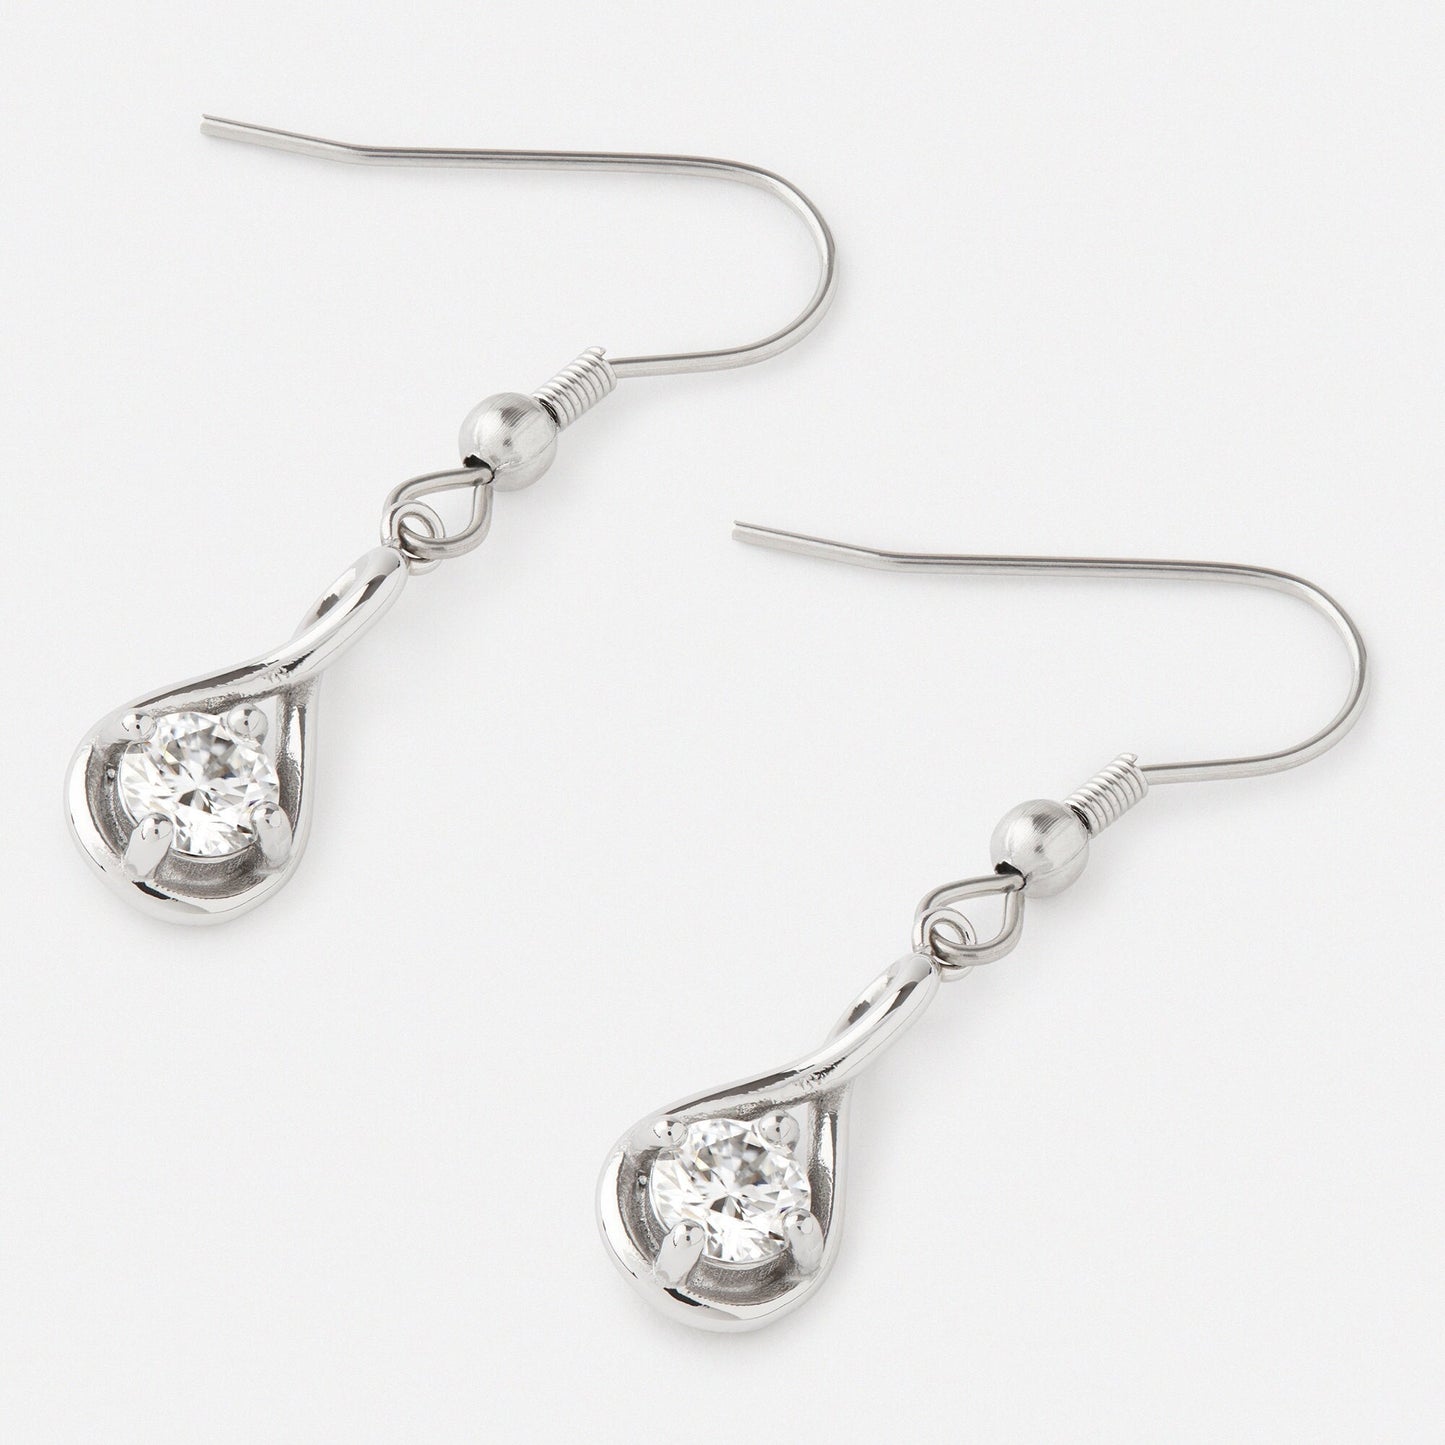 GENUINE Moissanite dangle earrings, available in titanium, white gold and surgical steel